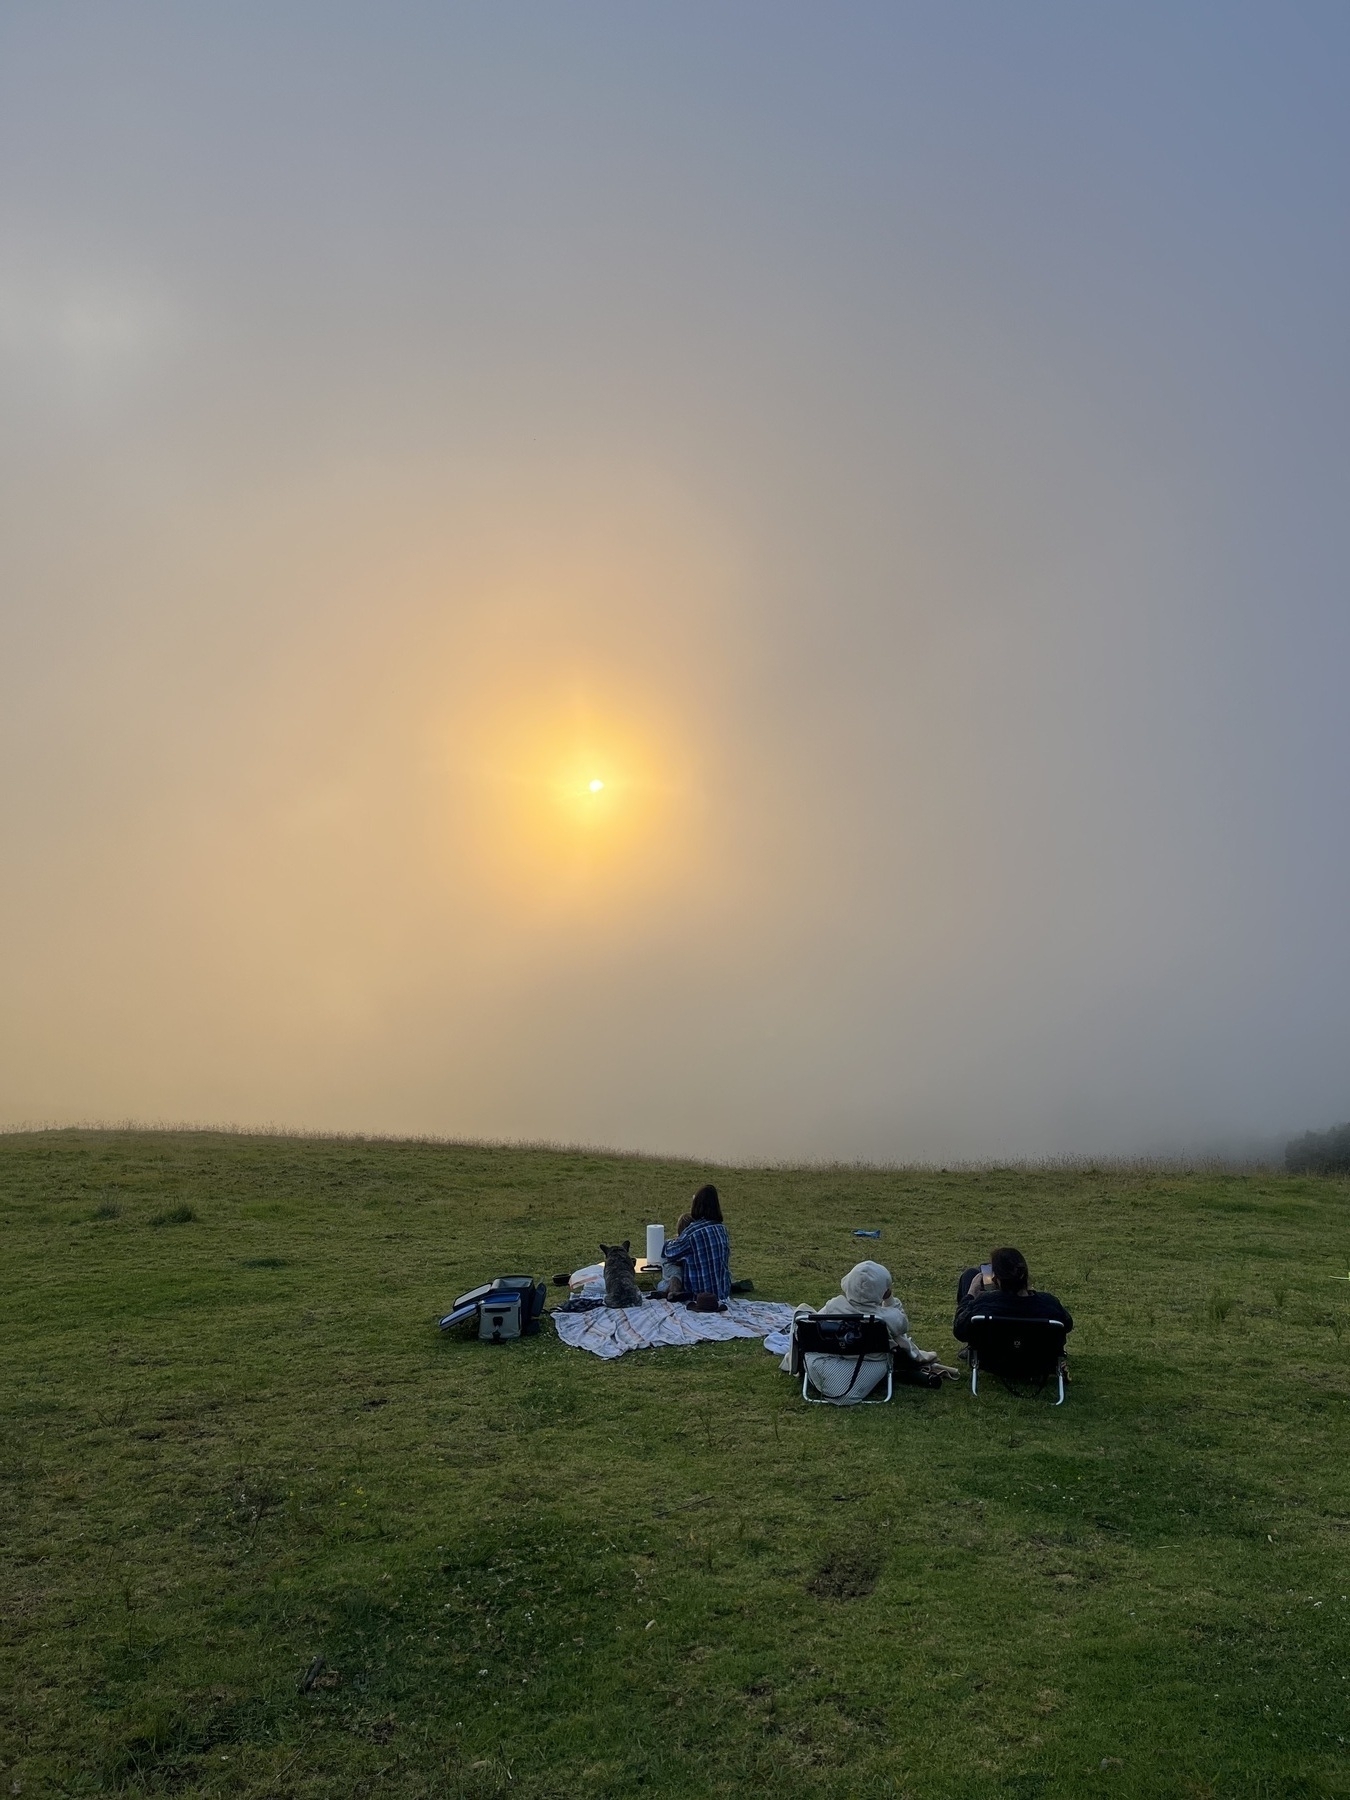 The sun pears through a thick cloud fog as people and a dog sit around a picnic blanket looking on.